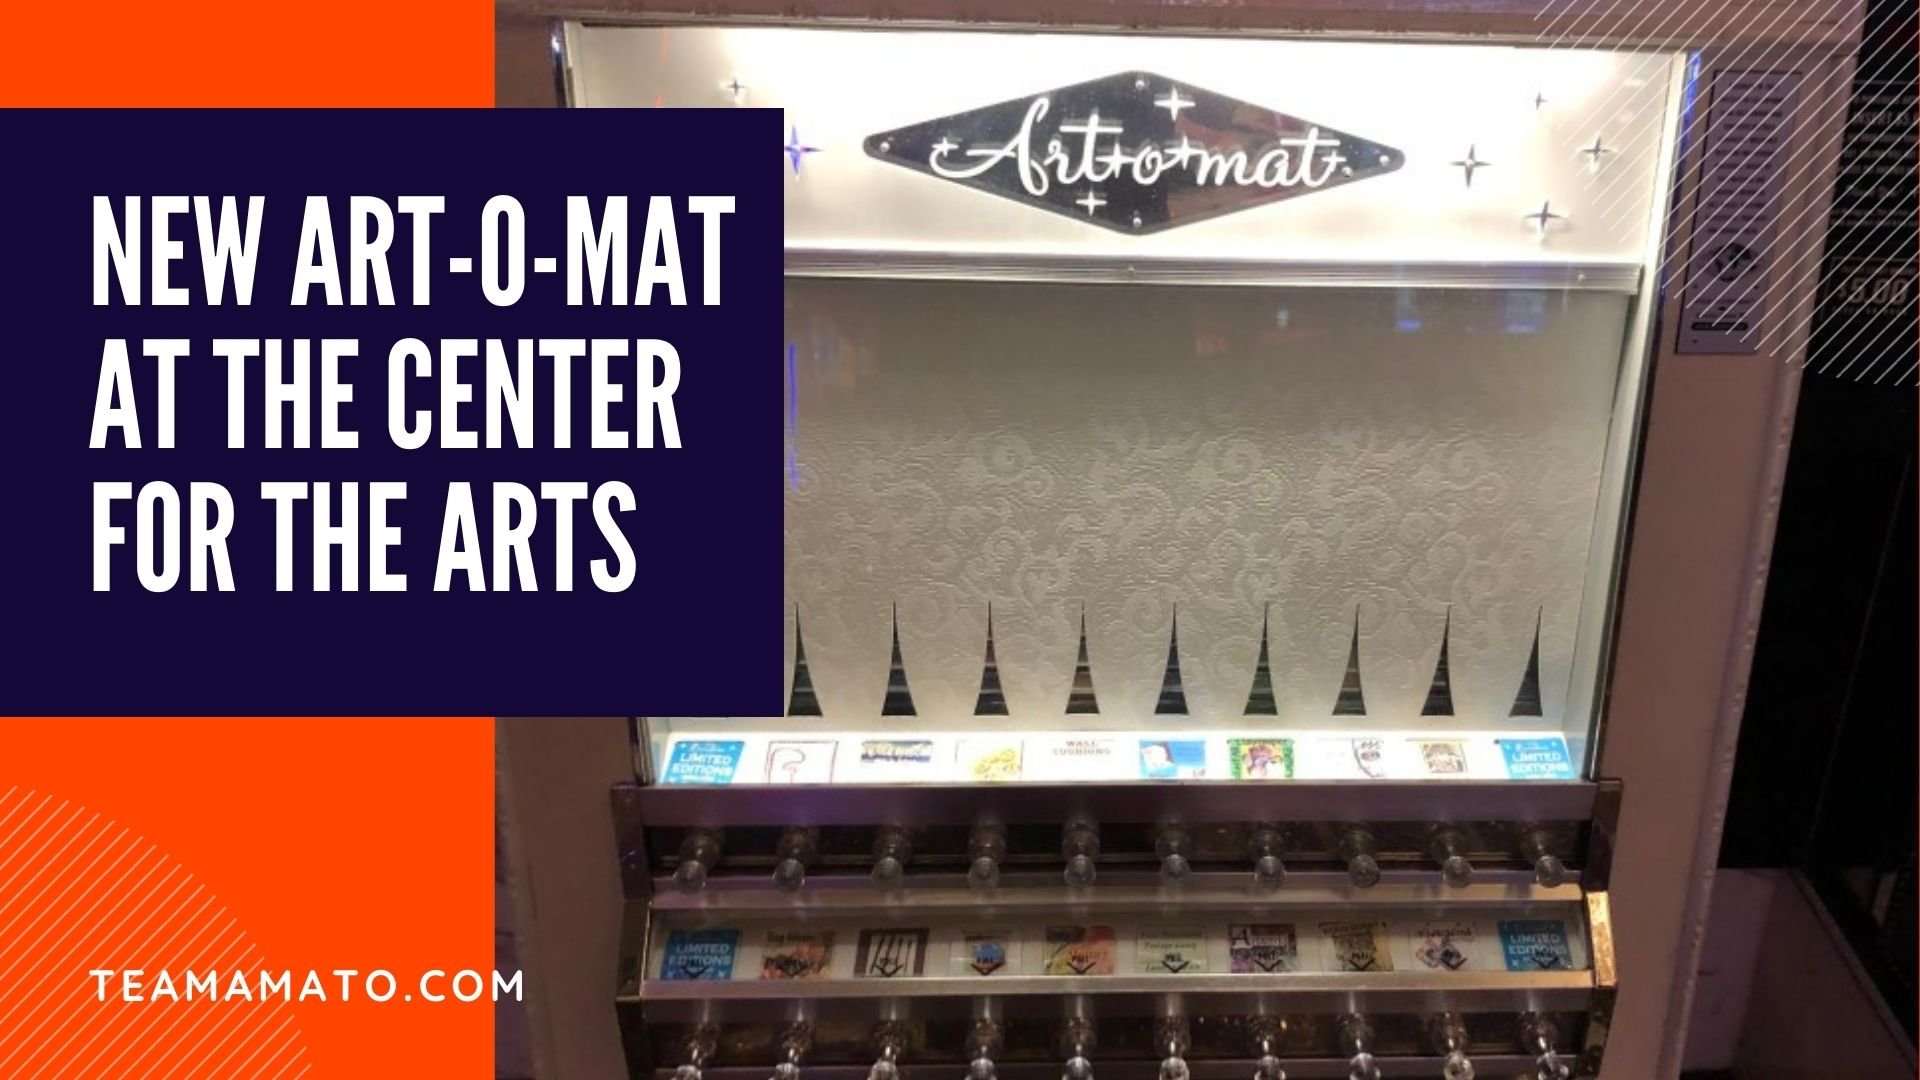 New Art-O-Mat at the Center for the Arts